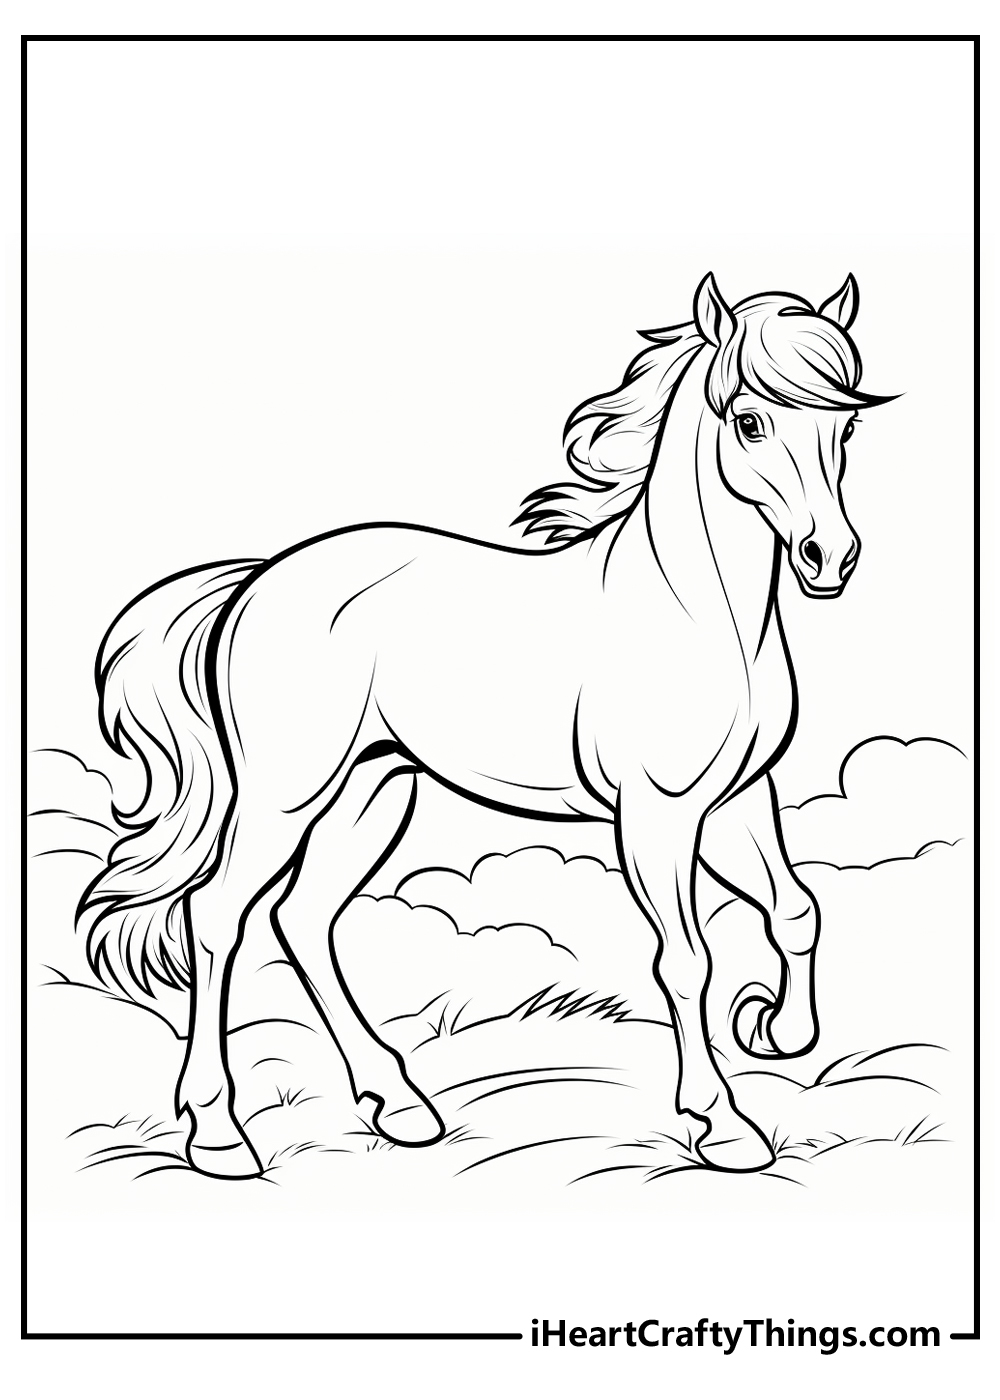 black-and-white horse coloring pages